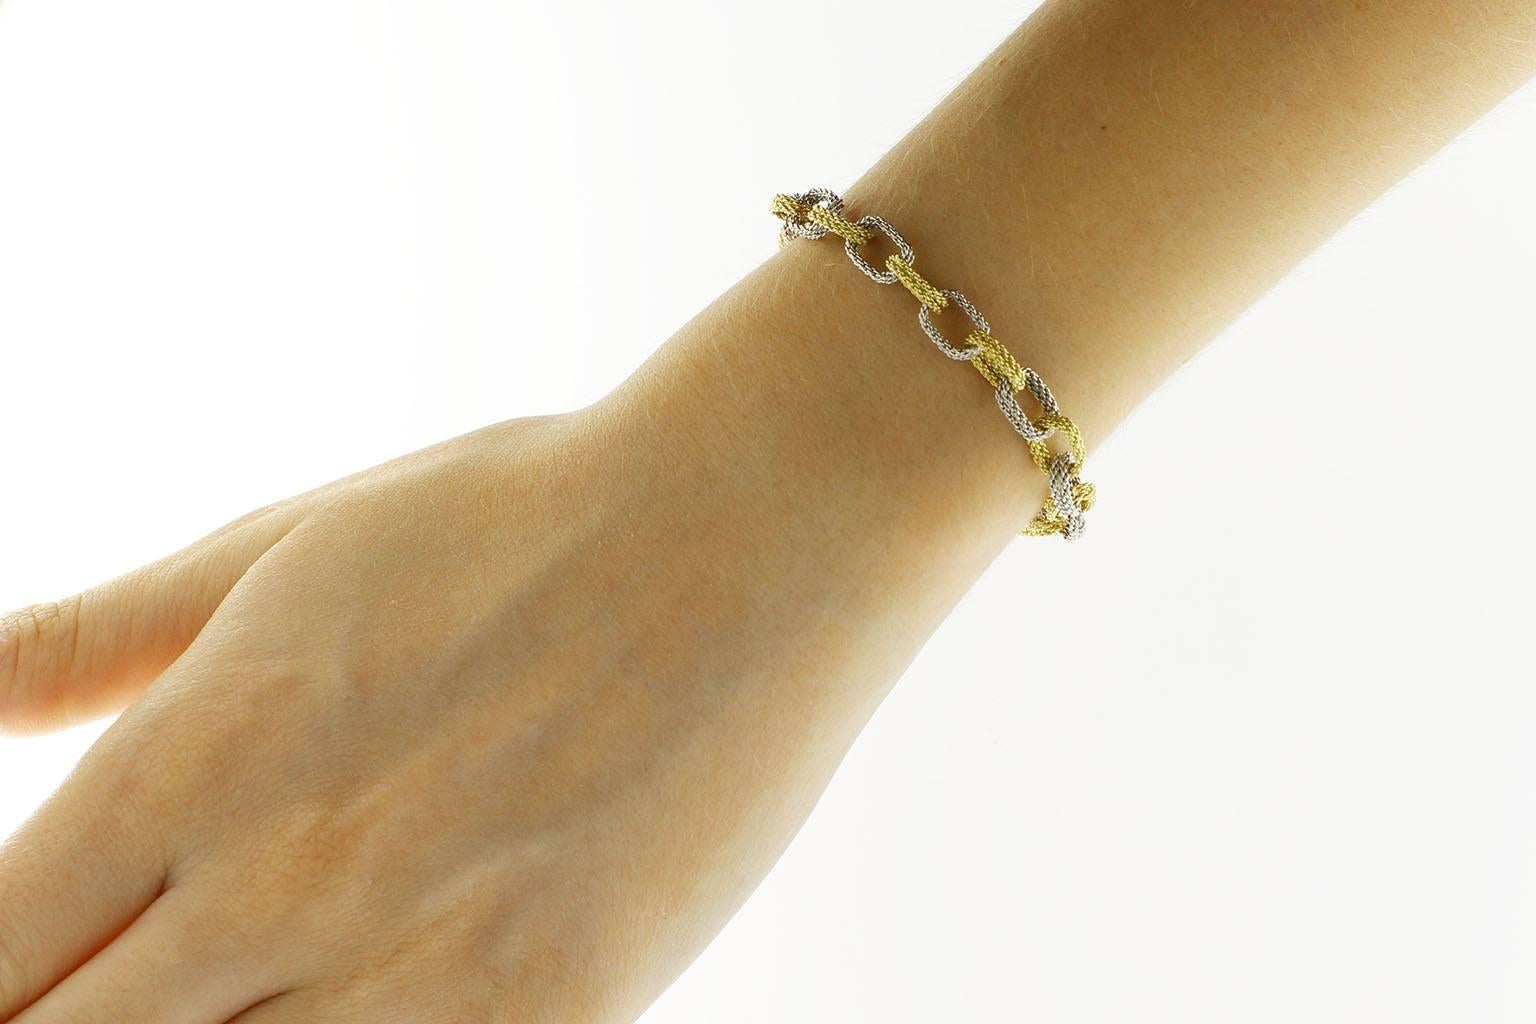 Jona design collection, hand made in Italy, 18 Karat woven yellow and white gold chain bracelet.
All Jona jewelry is new and has never been previously owned or worn. Each item will arrive at your door beautifully gift wrapped in Jona boxes, put